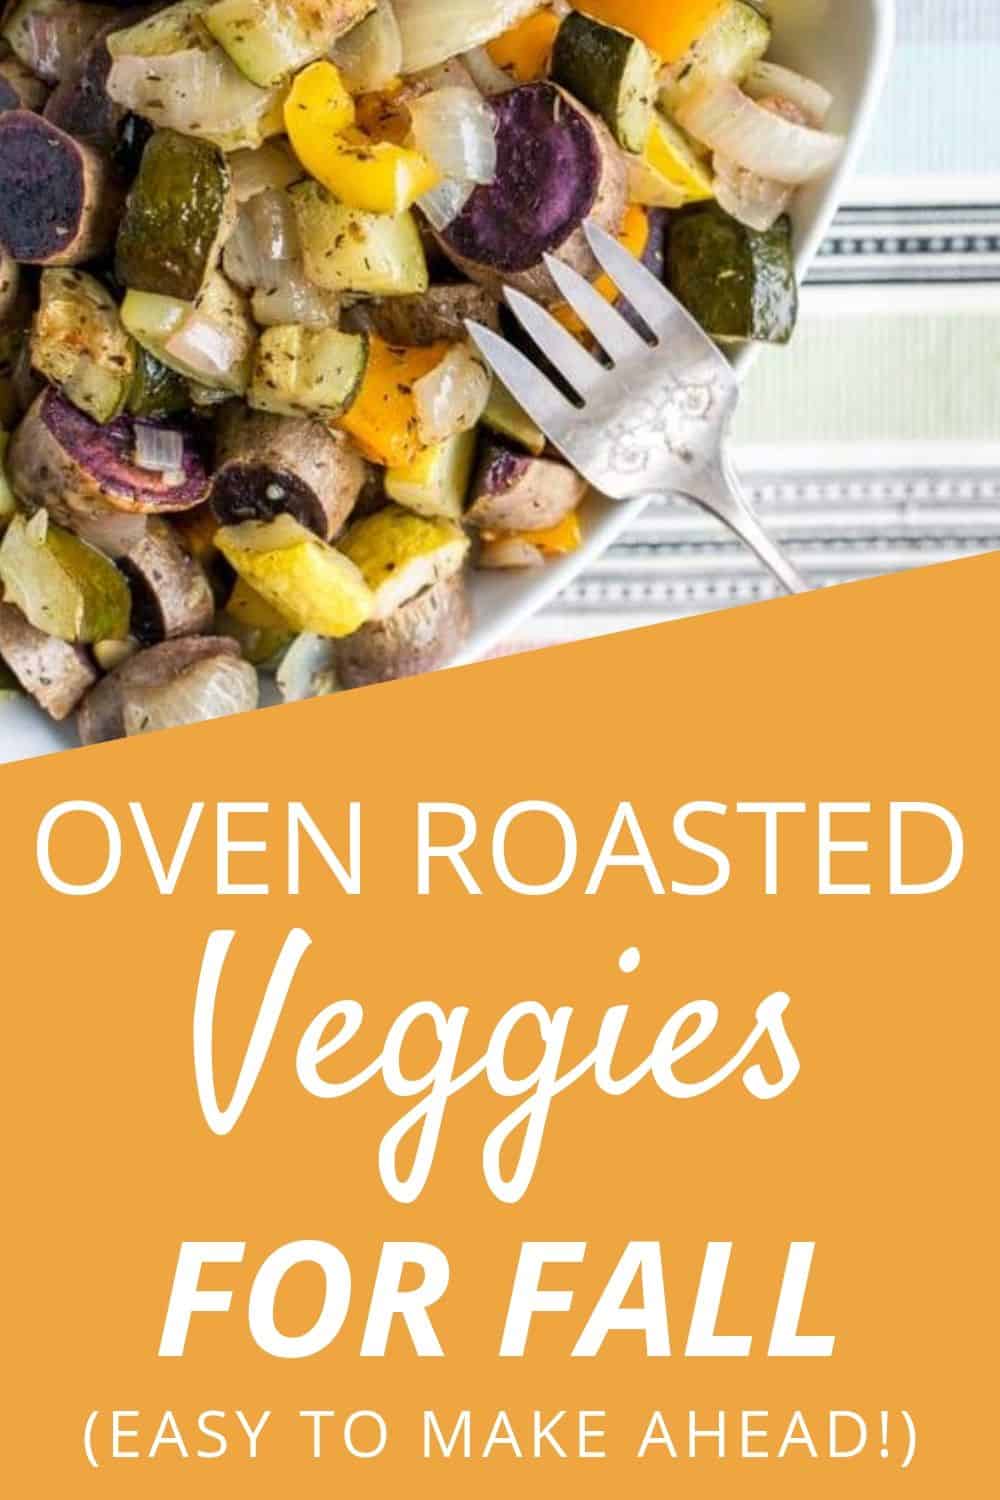 oven roasted veggies for fall